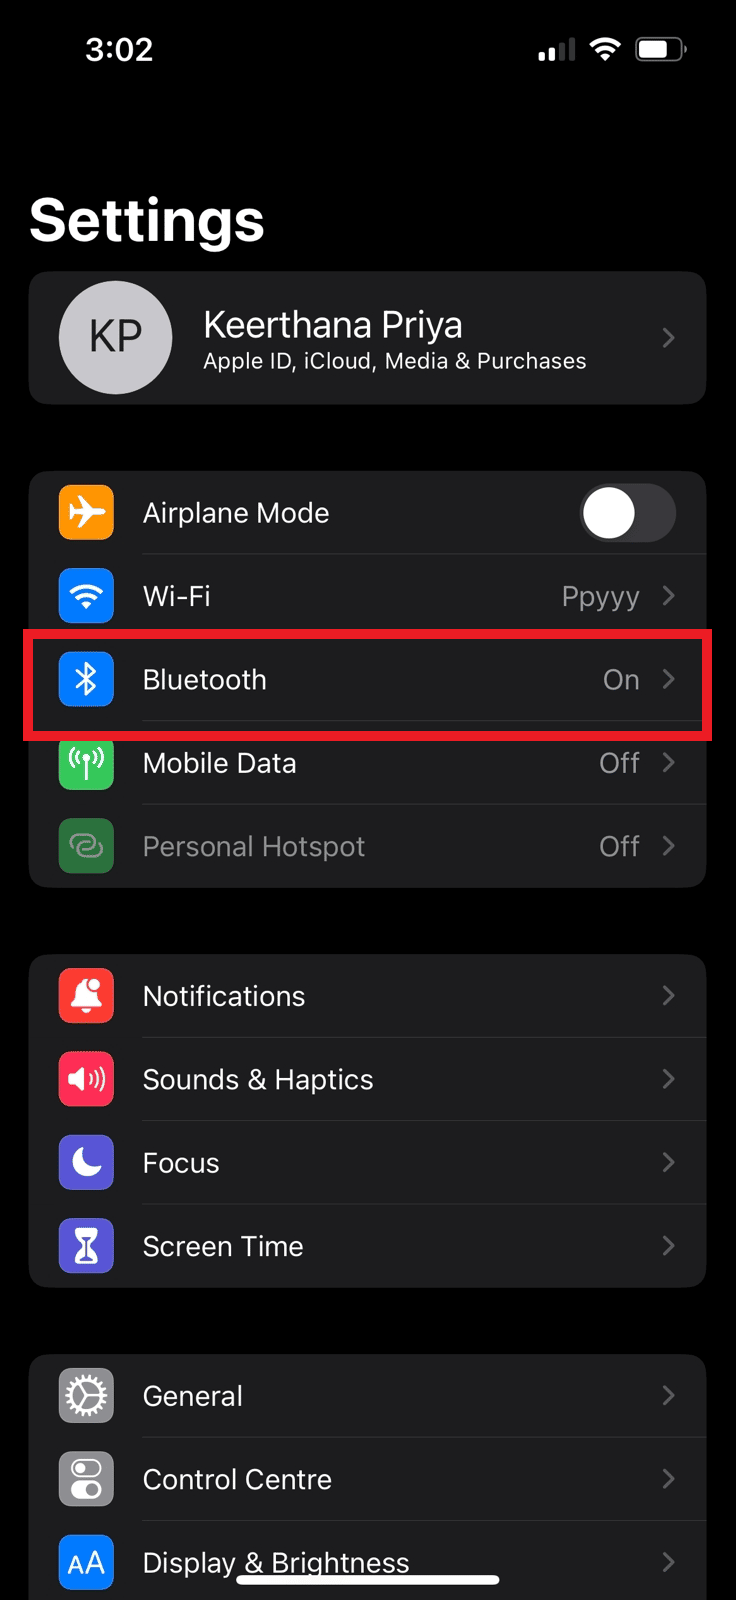 Go to the Bluetooth option | iPhone call volume too low after update